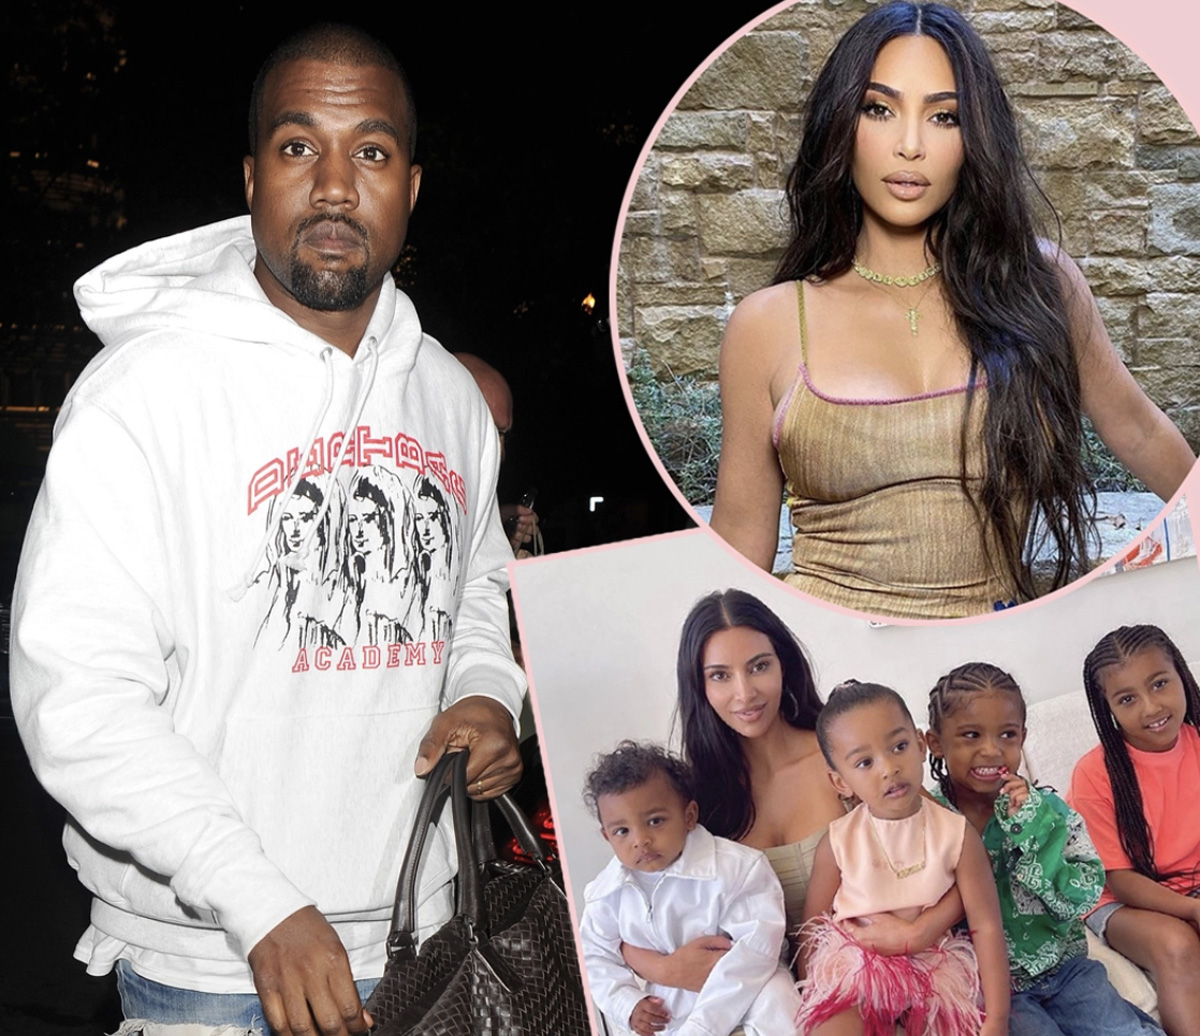 Kim Kardashian And Kanye West Reportedly Aiming For Informal Custody Agreement Amid Final Divorce 